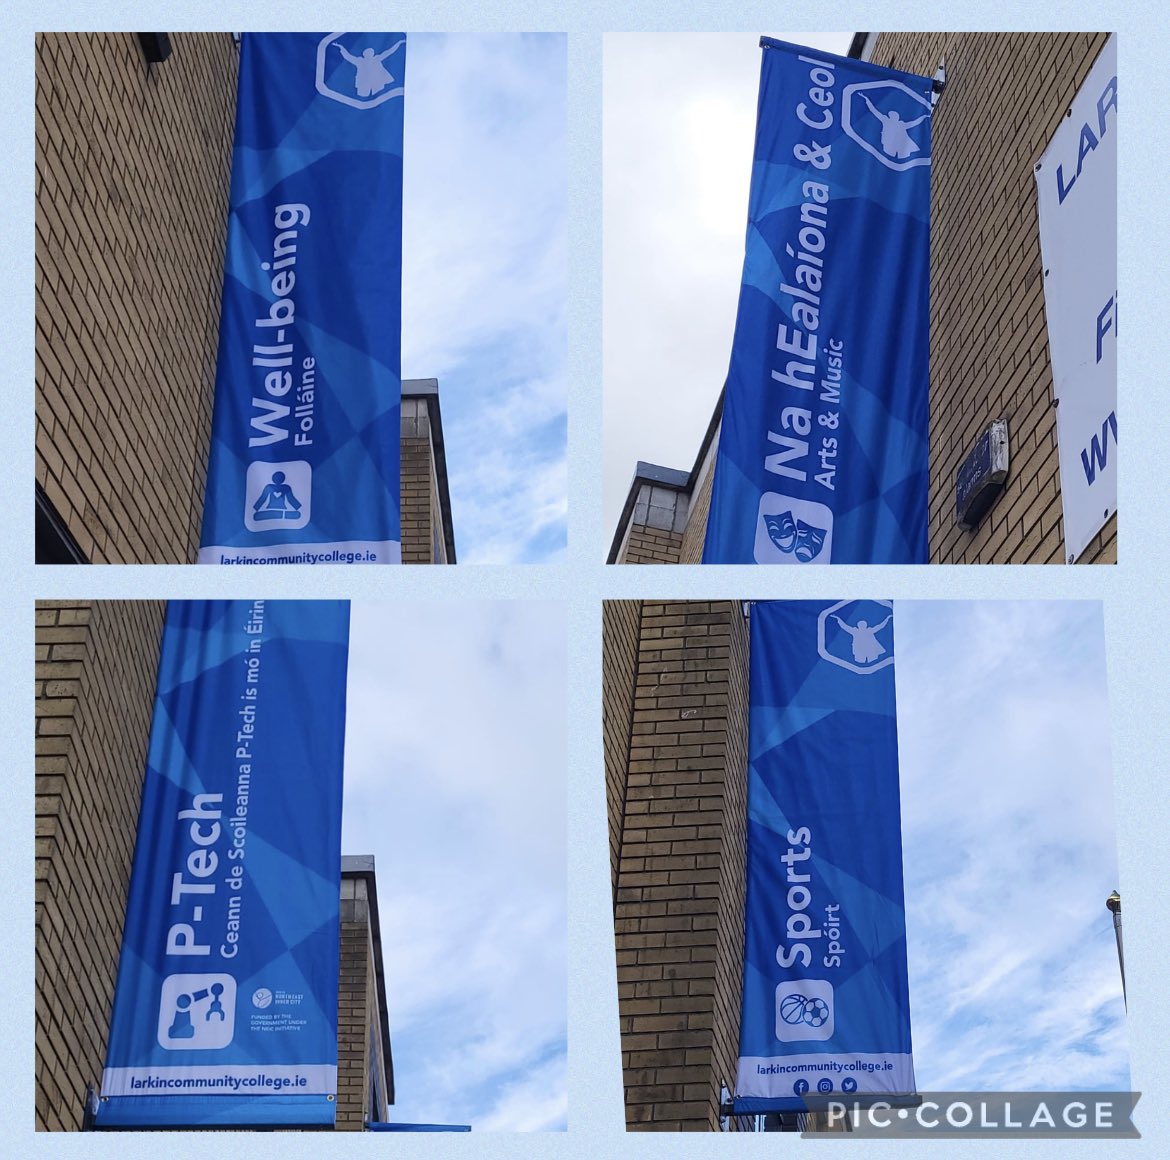 Loving our new flags which are located on the front of the school 😍😍😍 #deis #neic #school #postprimary #arts #music #sports #ptech #wellbeing #academicexcellence